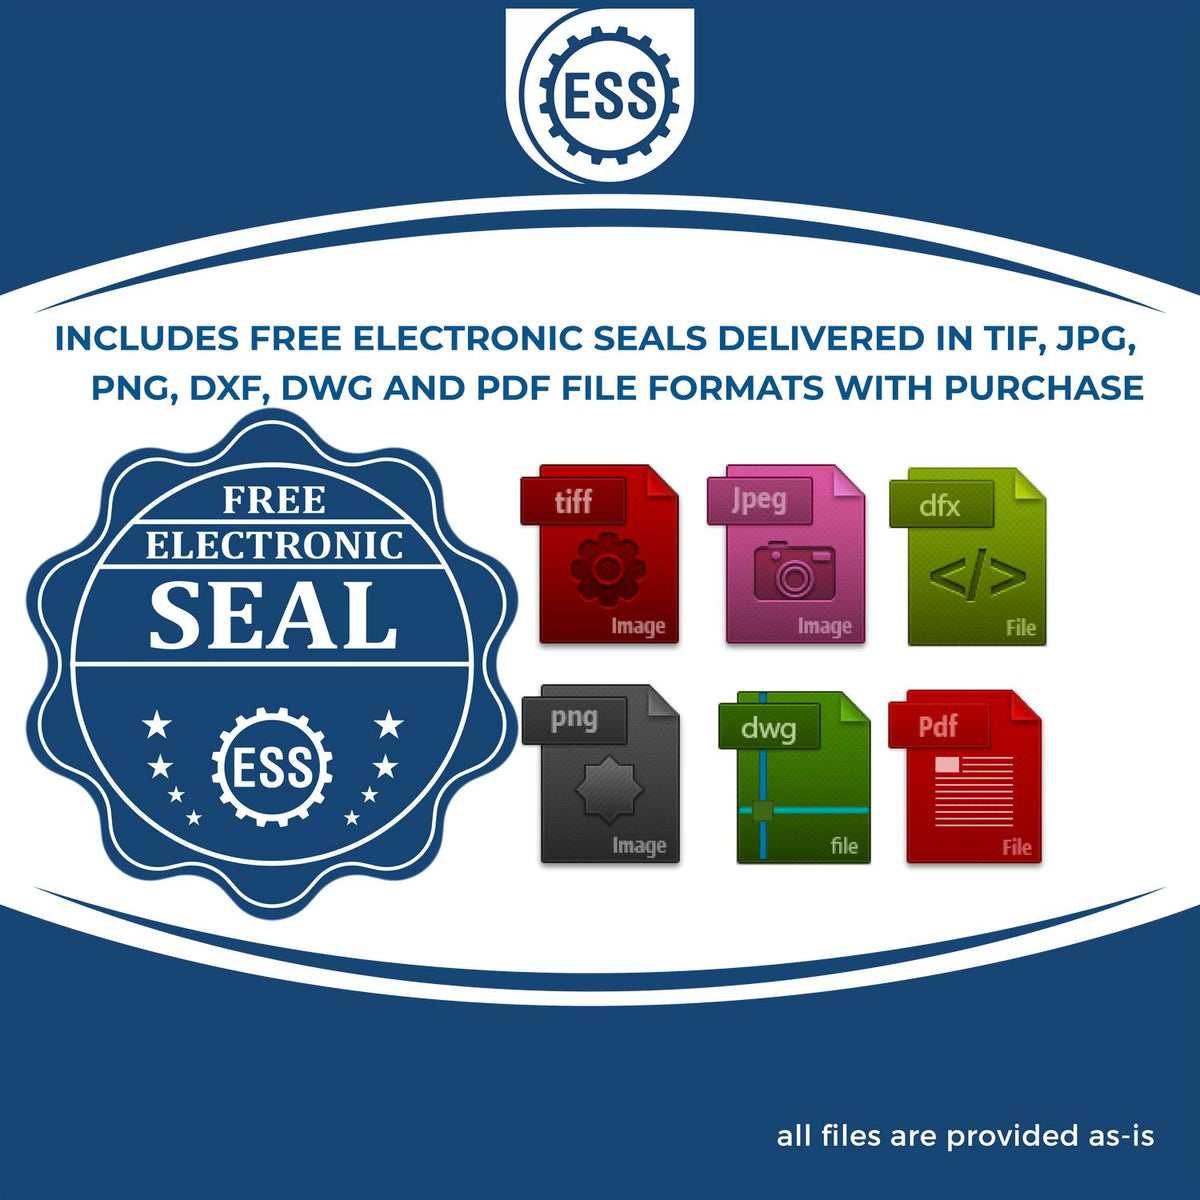 An infographic for the free electronic seal for the Gift North Dakota Architect Seal illustrating the different file type icons such as DXF, DWG, TIF, JPG and PNG.